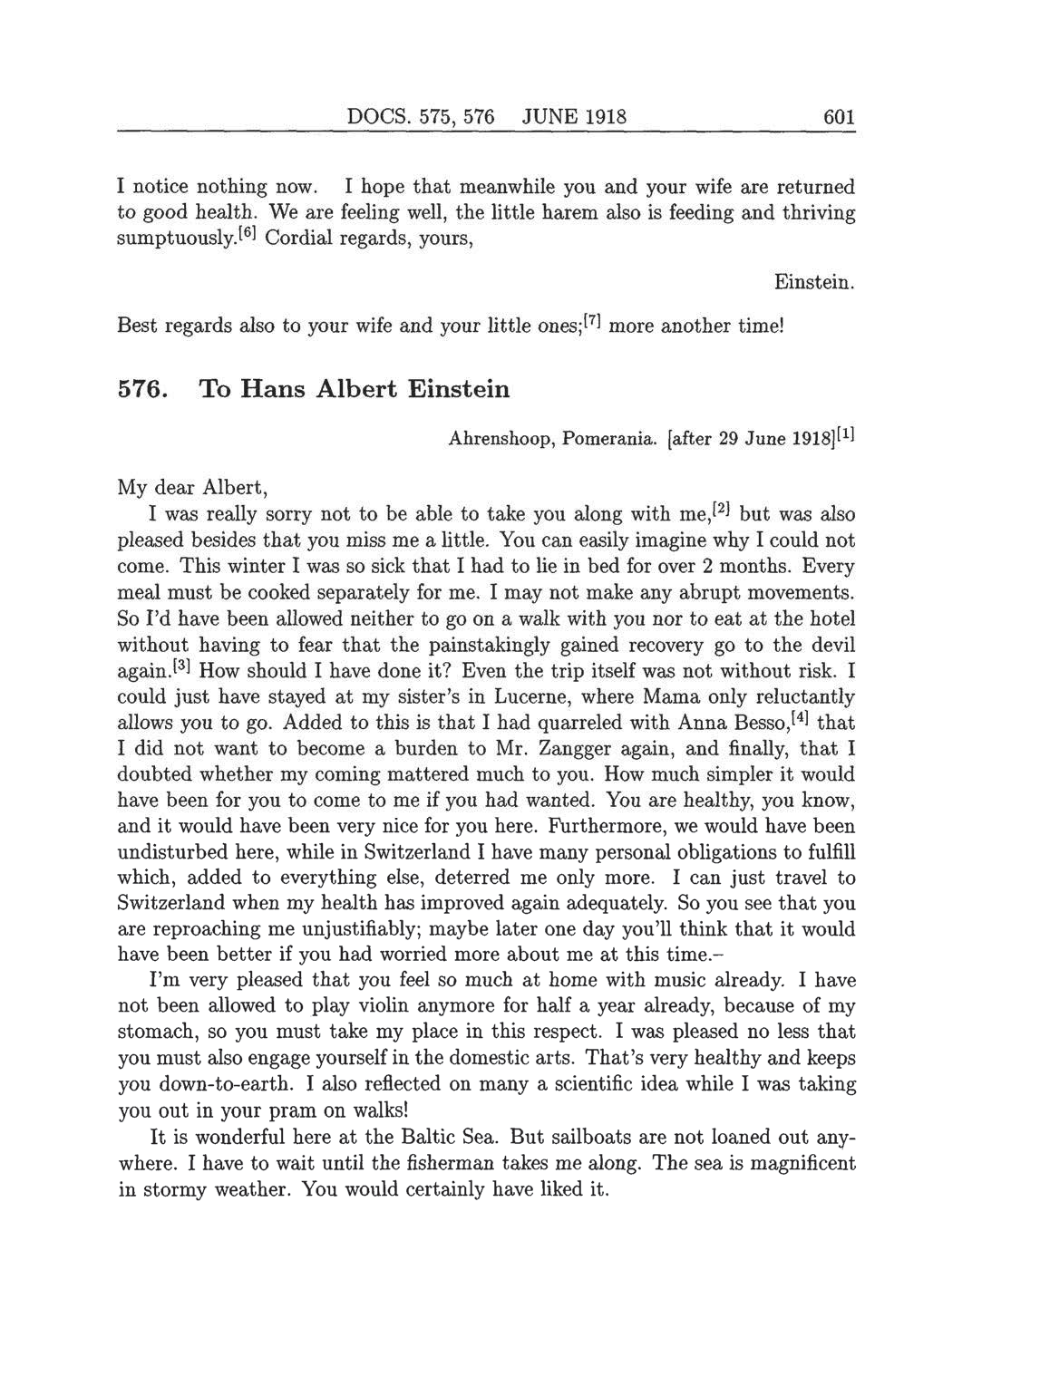 Volume 8: The Berlin Years: Correspondence, 1914-1918 (English translation supplement) page 601